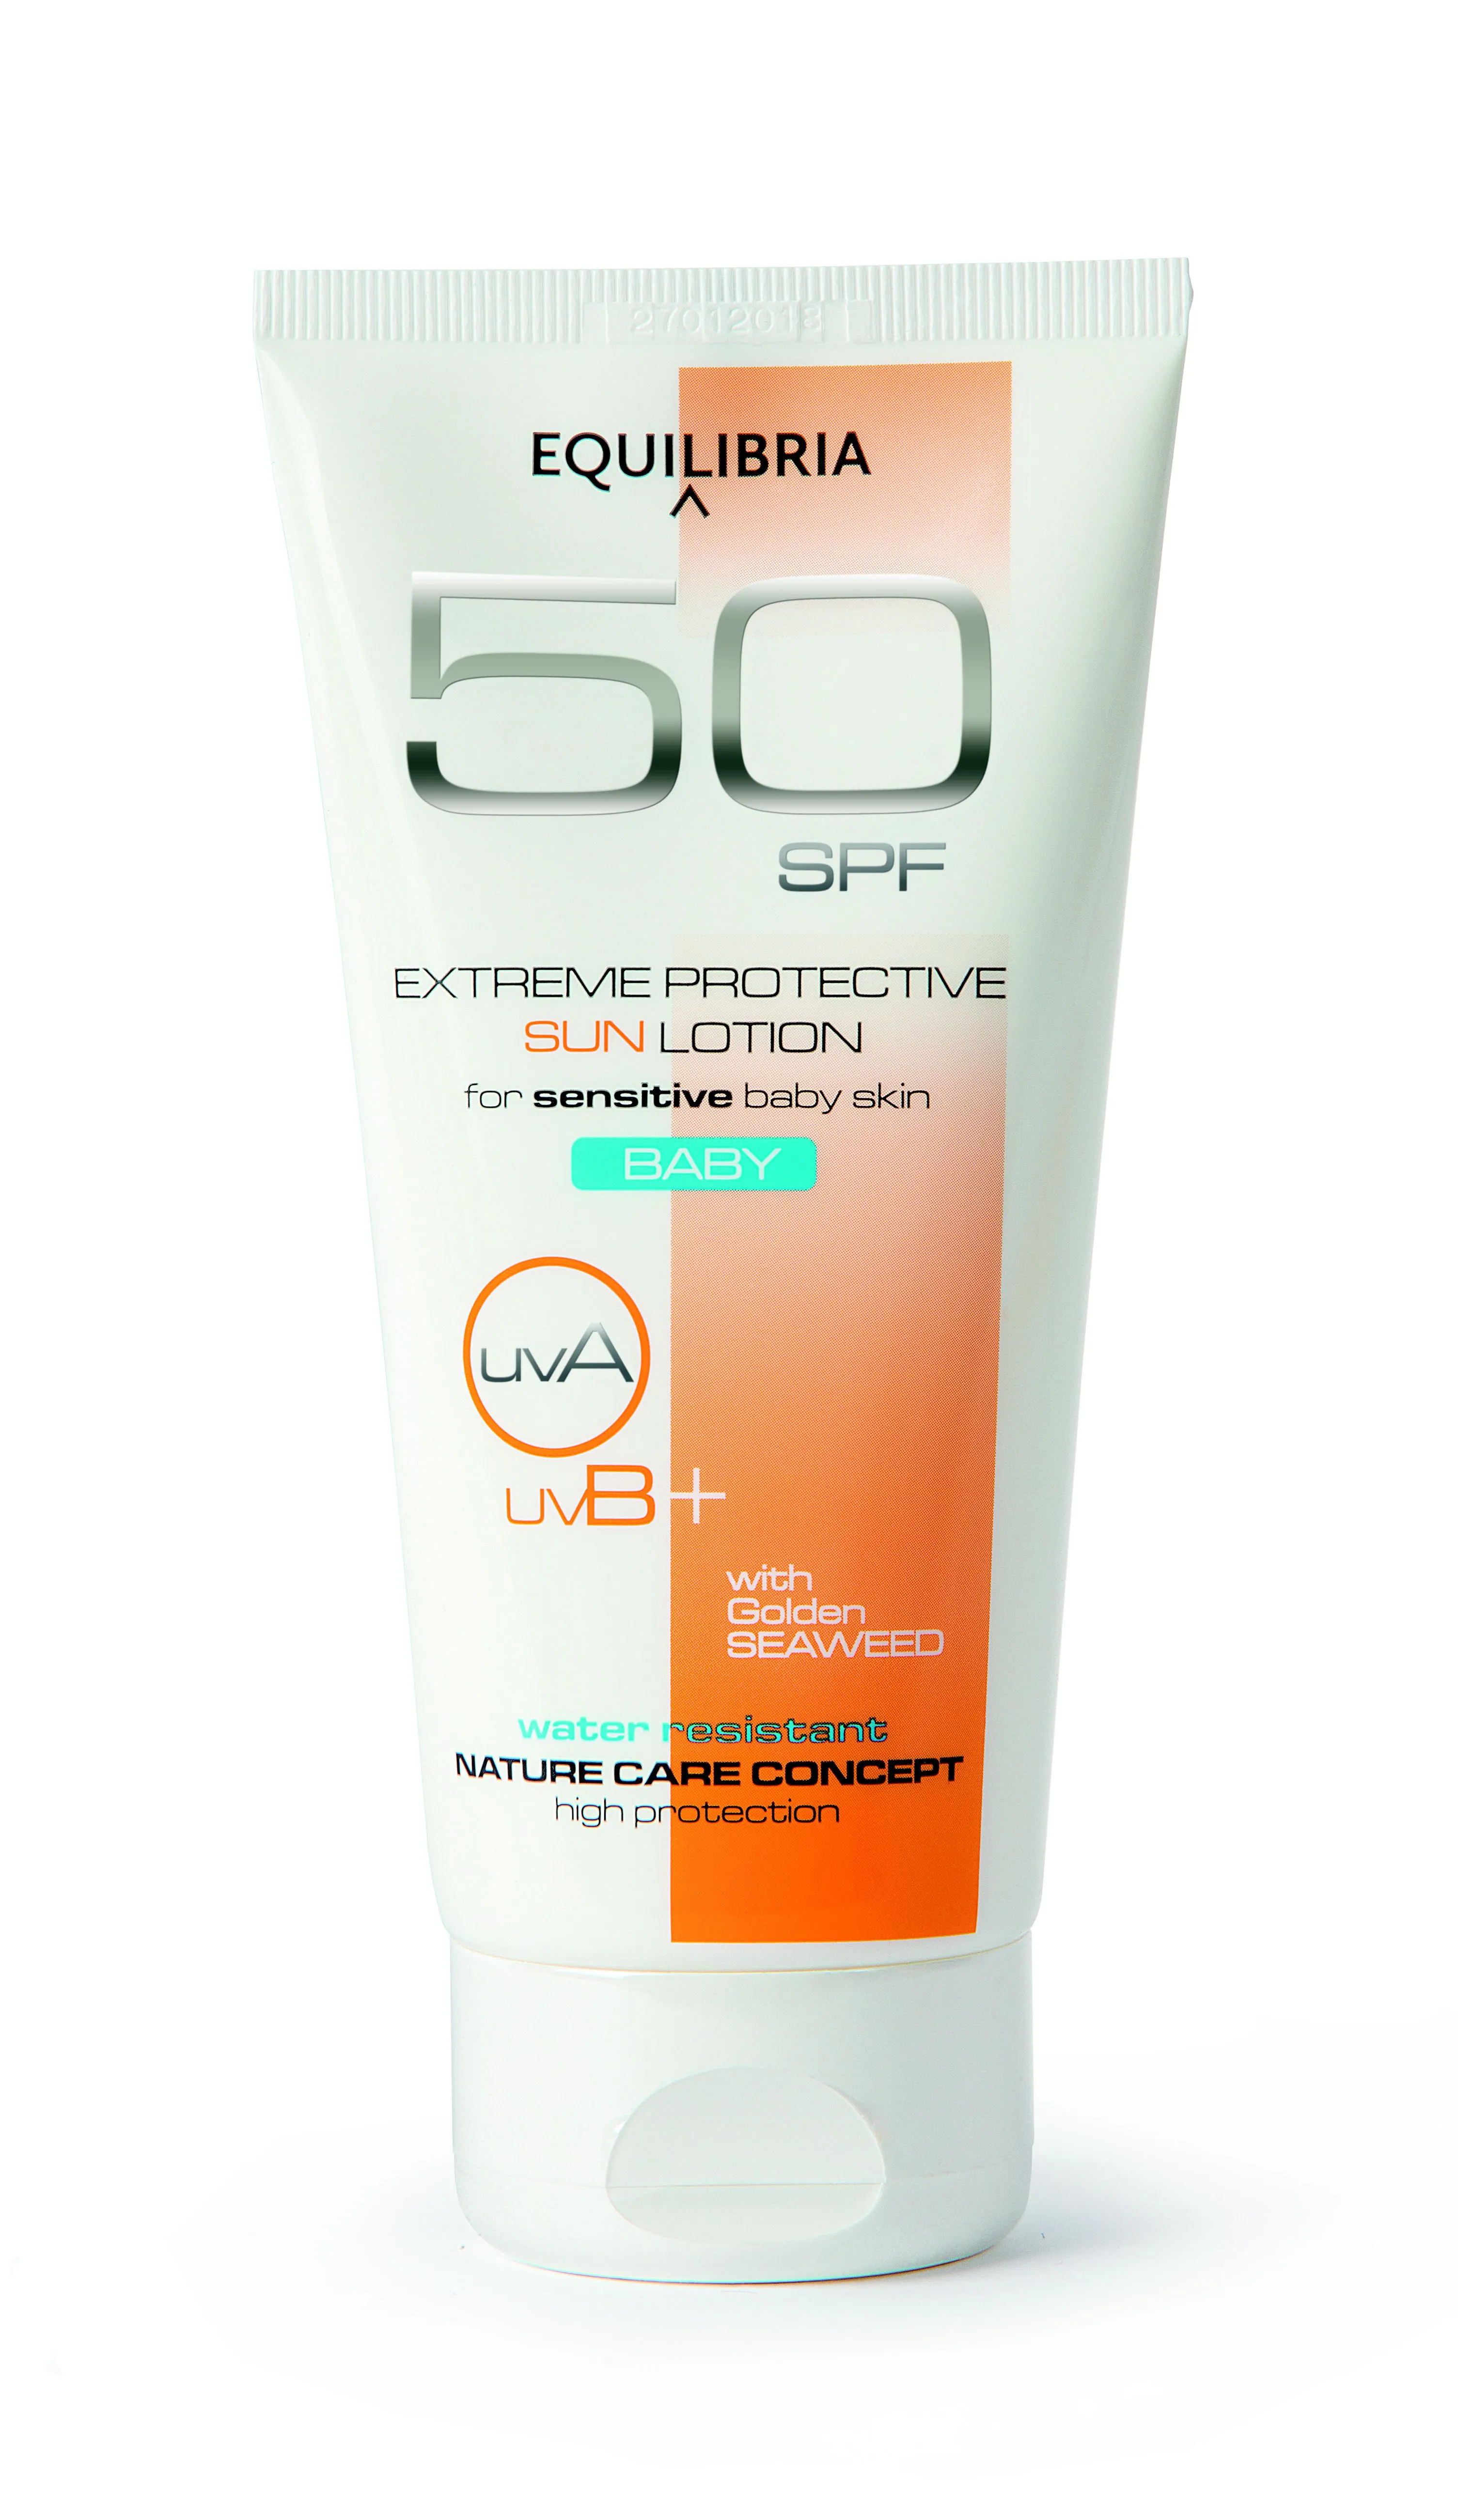 EQUILIBRIA Extreme Protective Sun Lotion SPF 50 Baby, 200ml